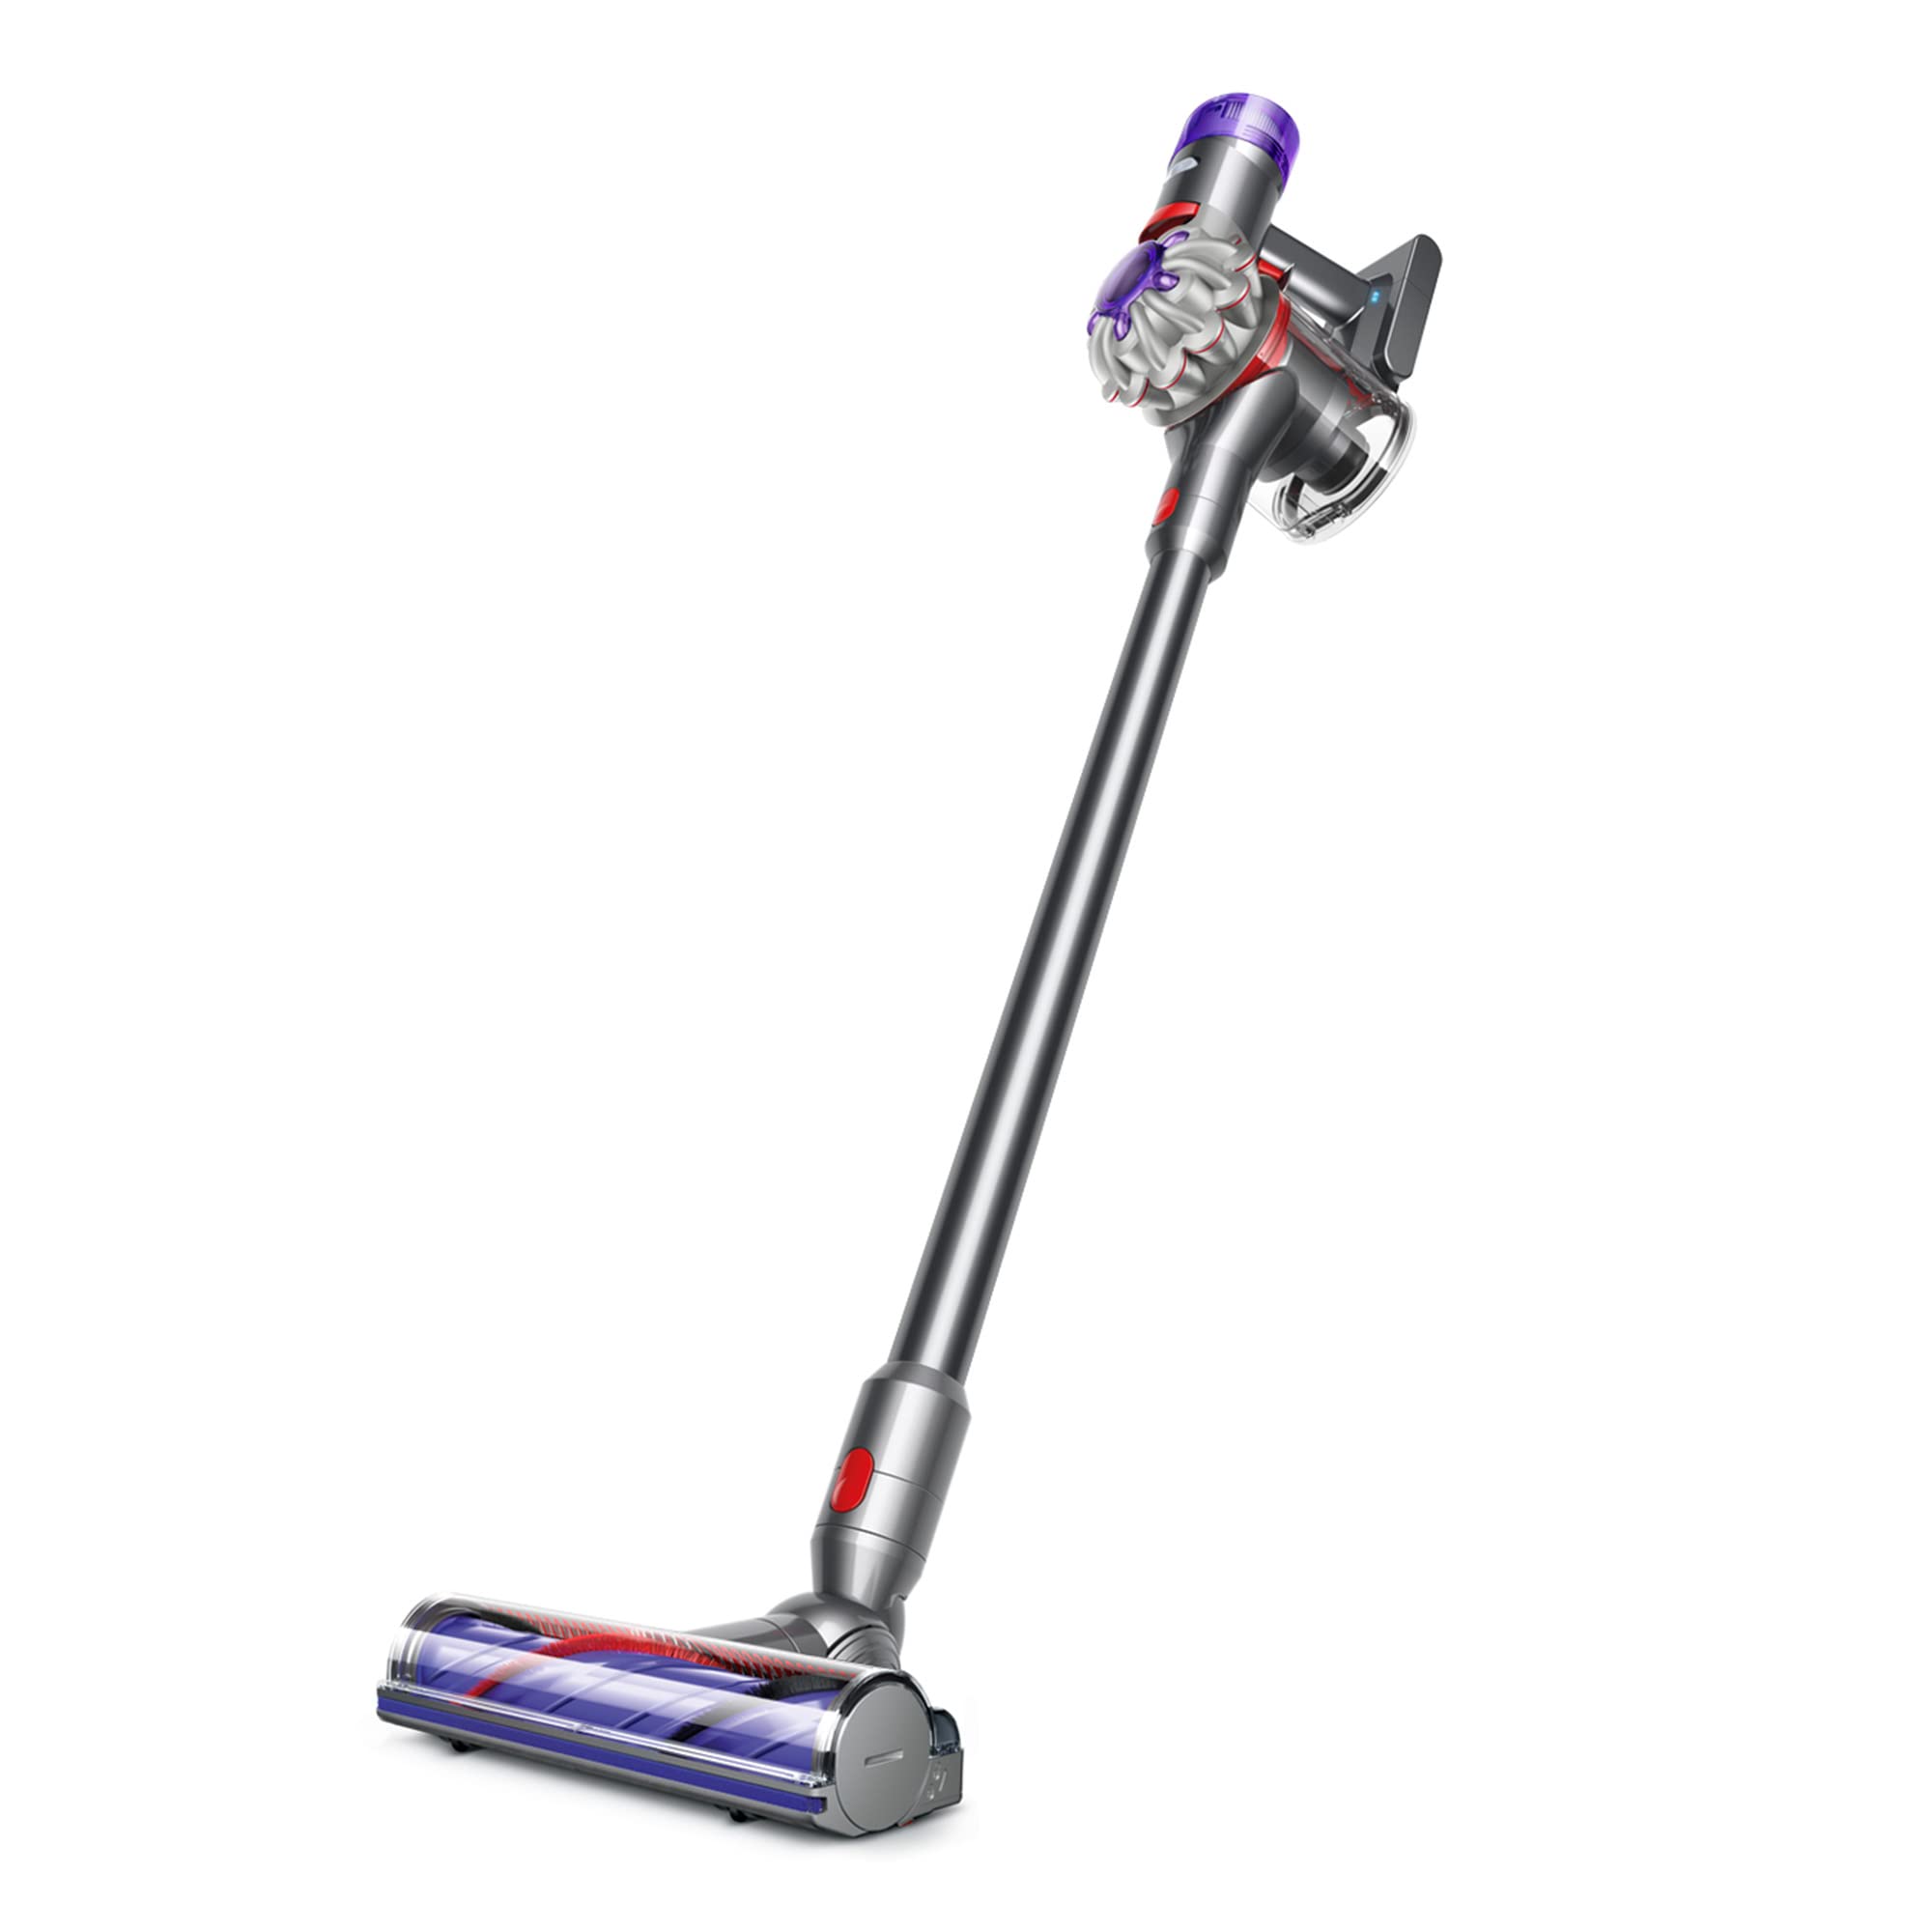 What You Ought to Know About Dyson V8 Cordless Vacuum Cleaner Earlier than You Purchase